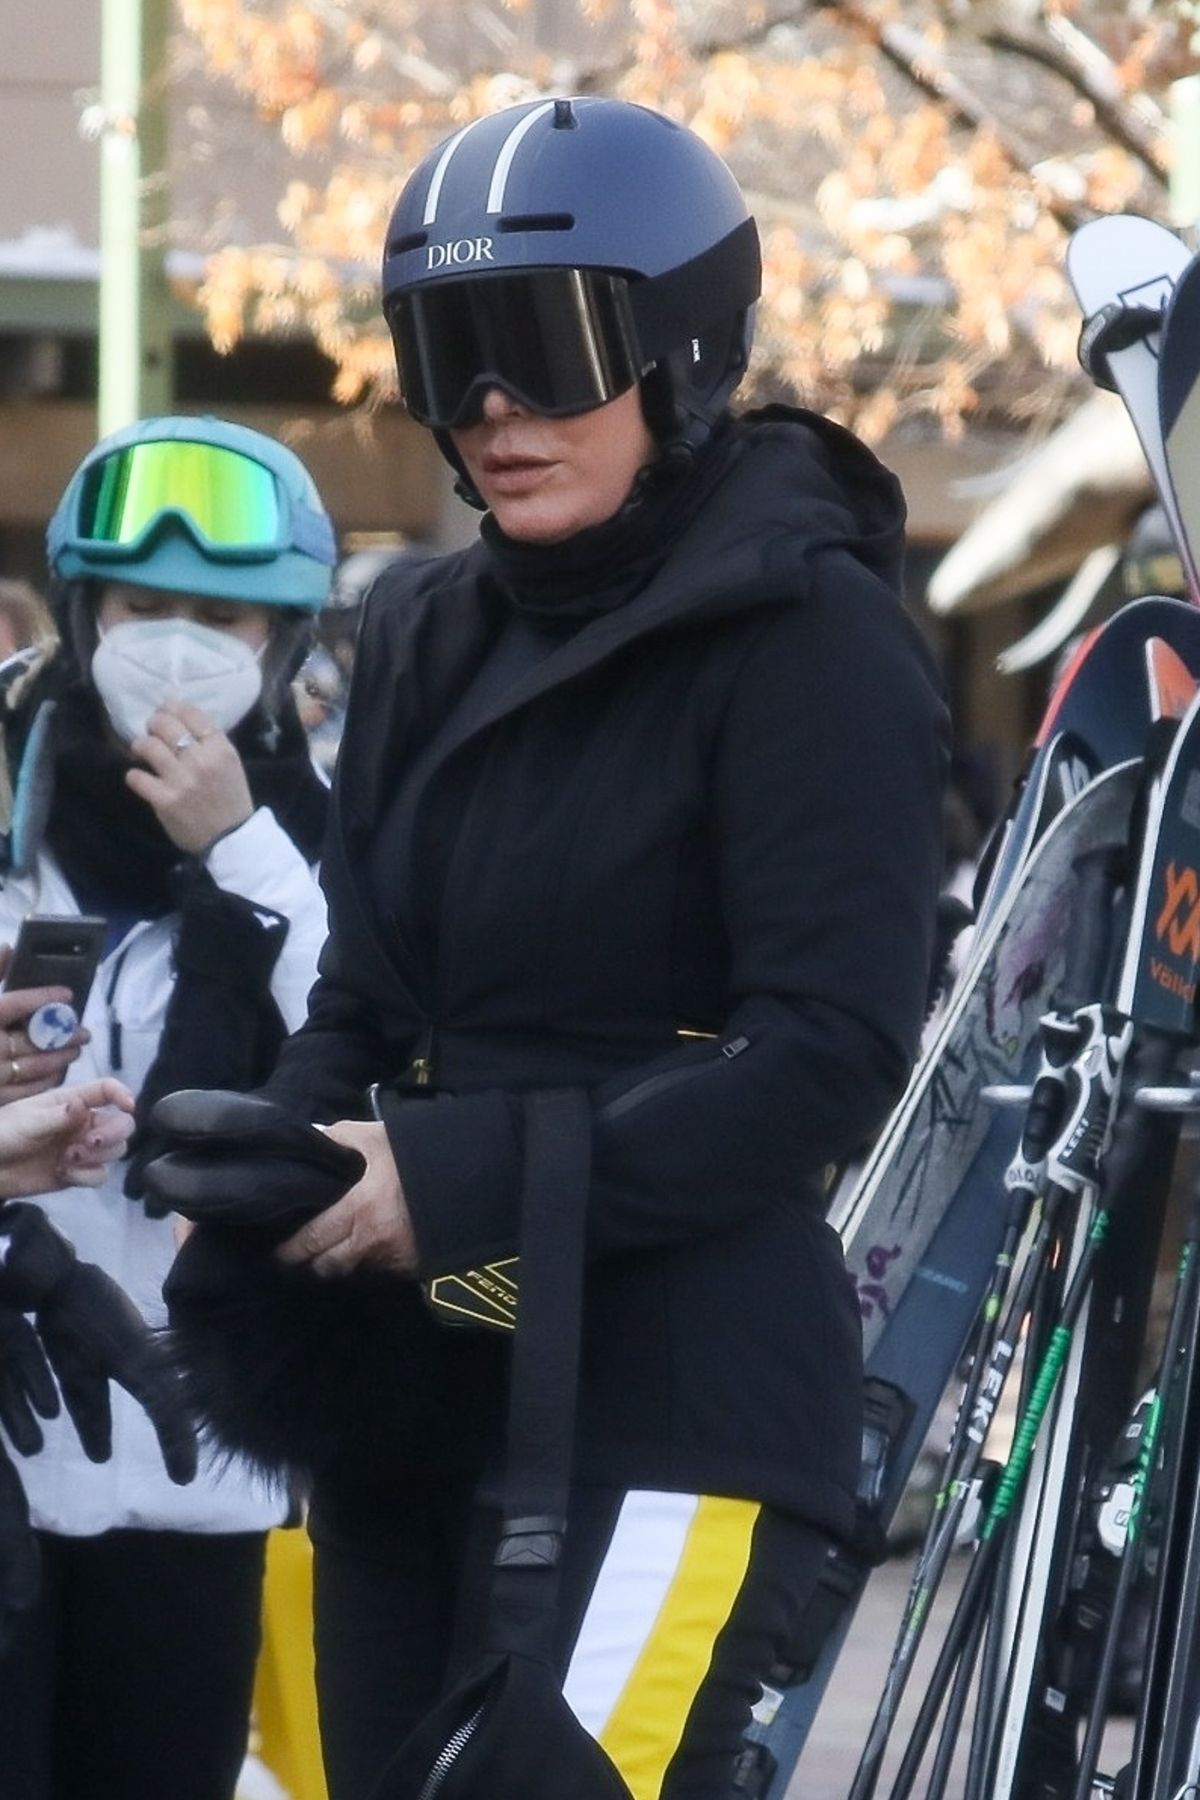 kendall-and-kris-jenner-out-in-aspen-12-31-2020-11.jpg